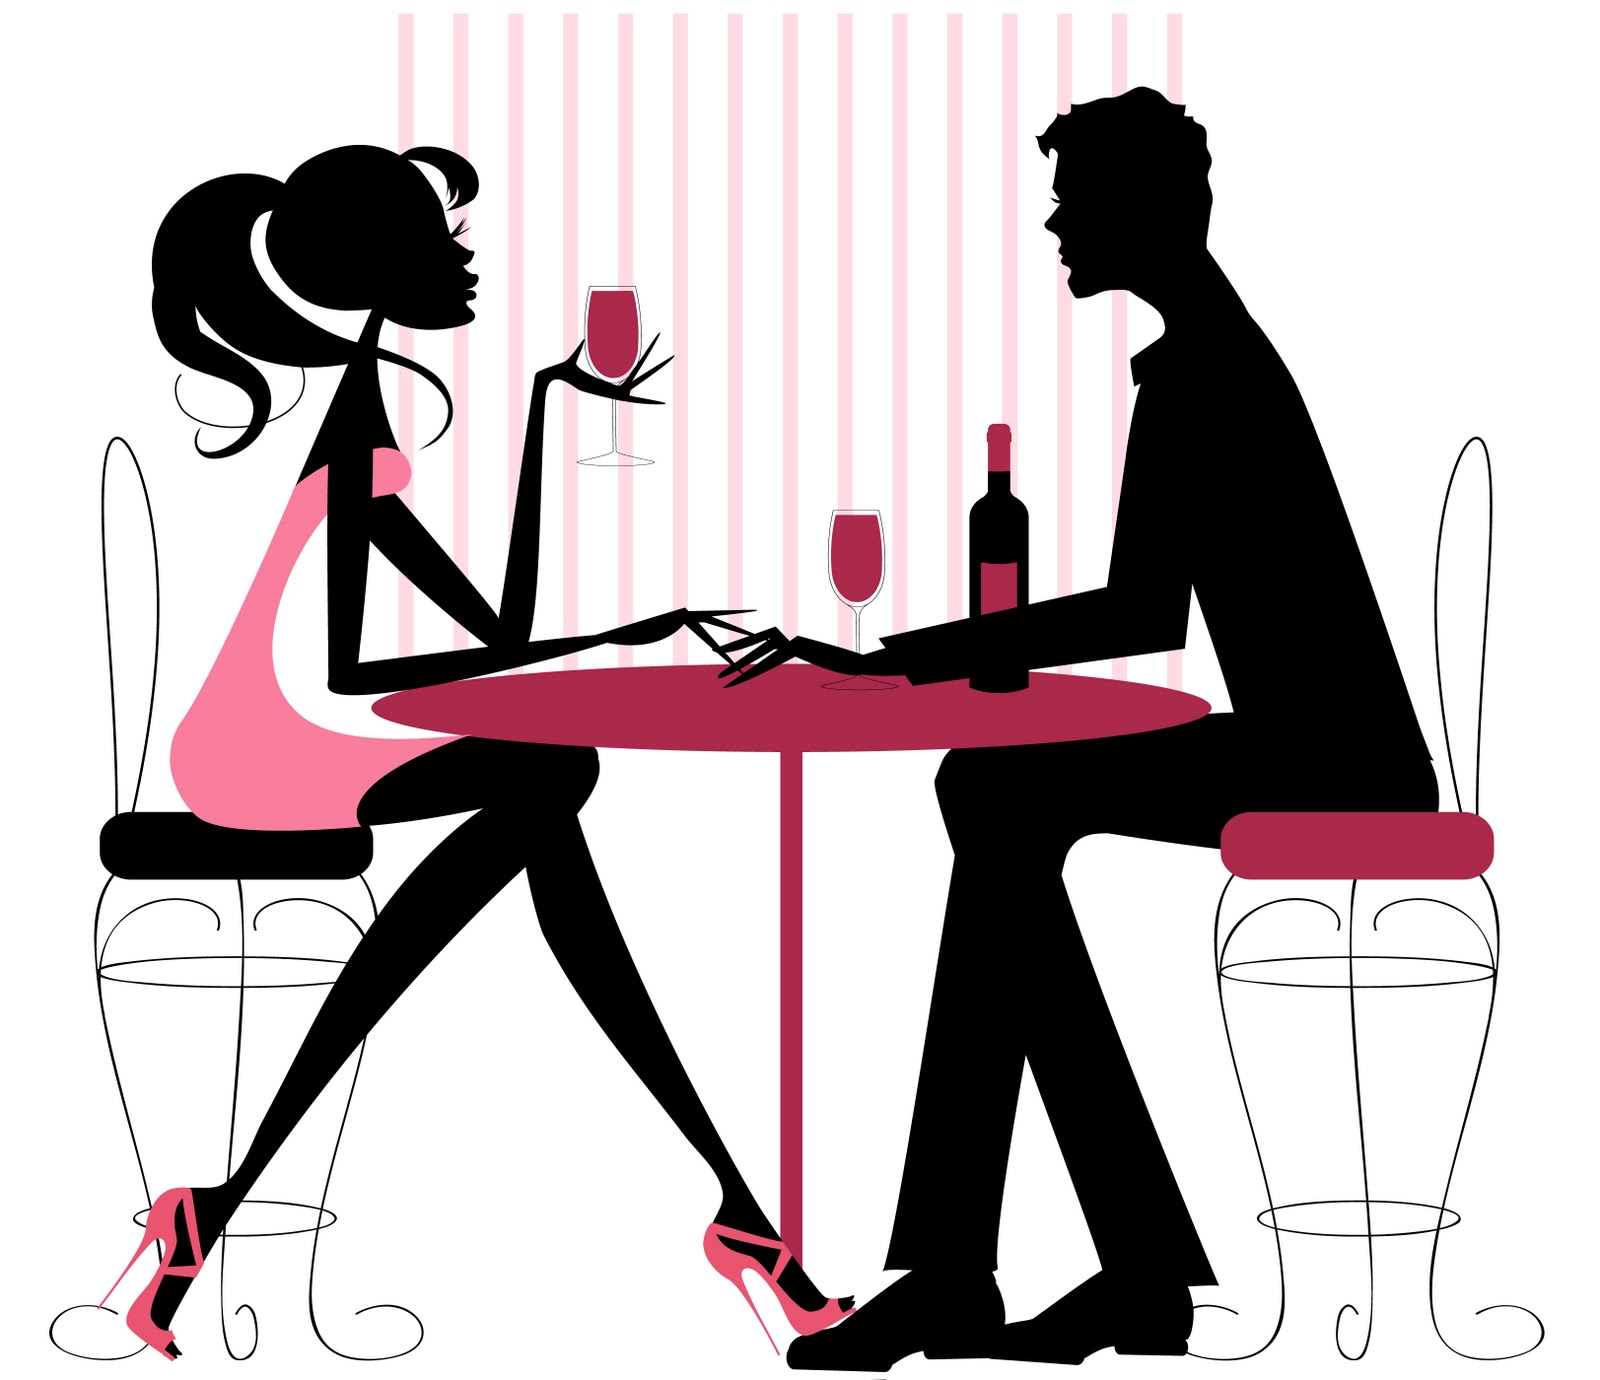 Nice Images Collection: Date Night Desktop Wallpapers